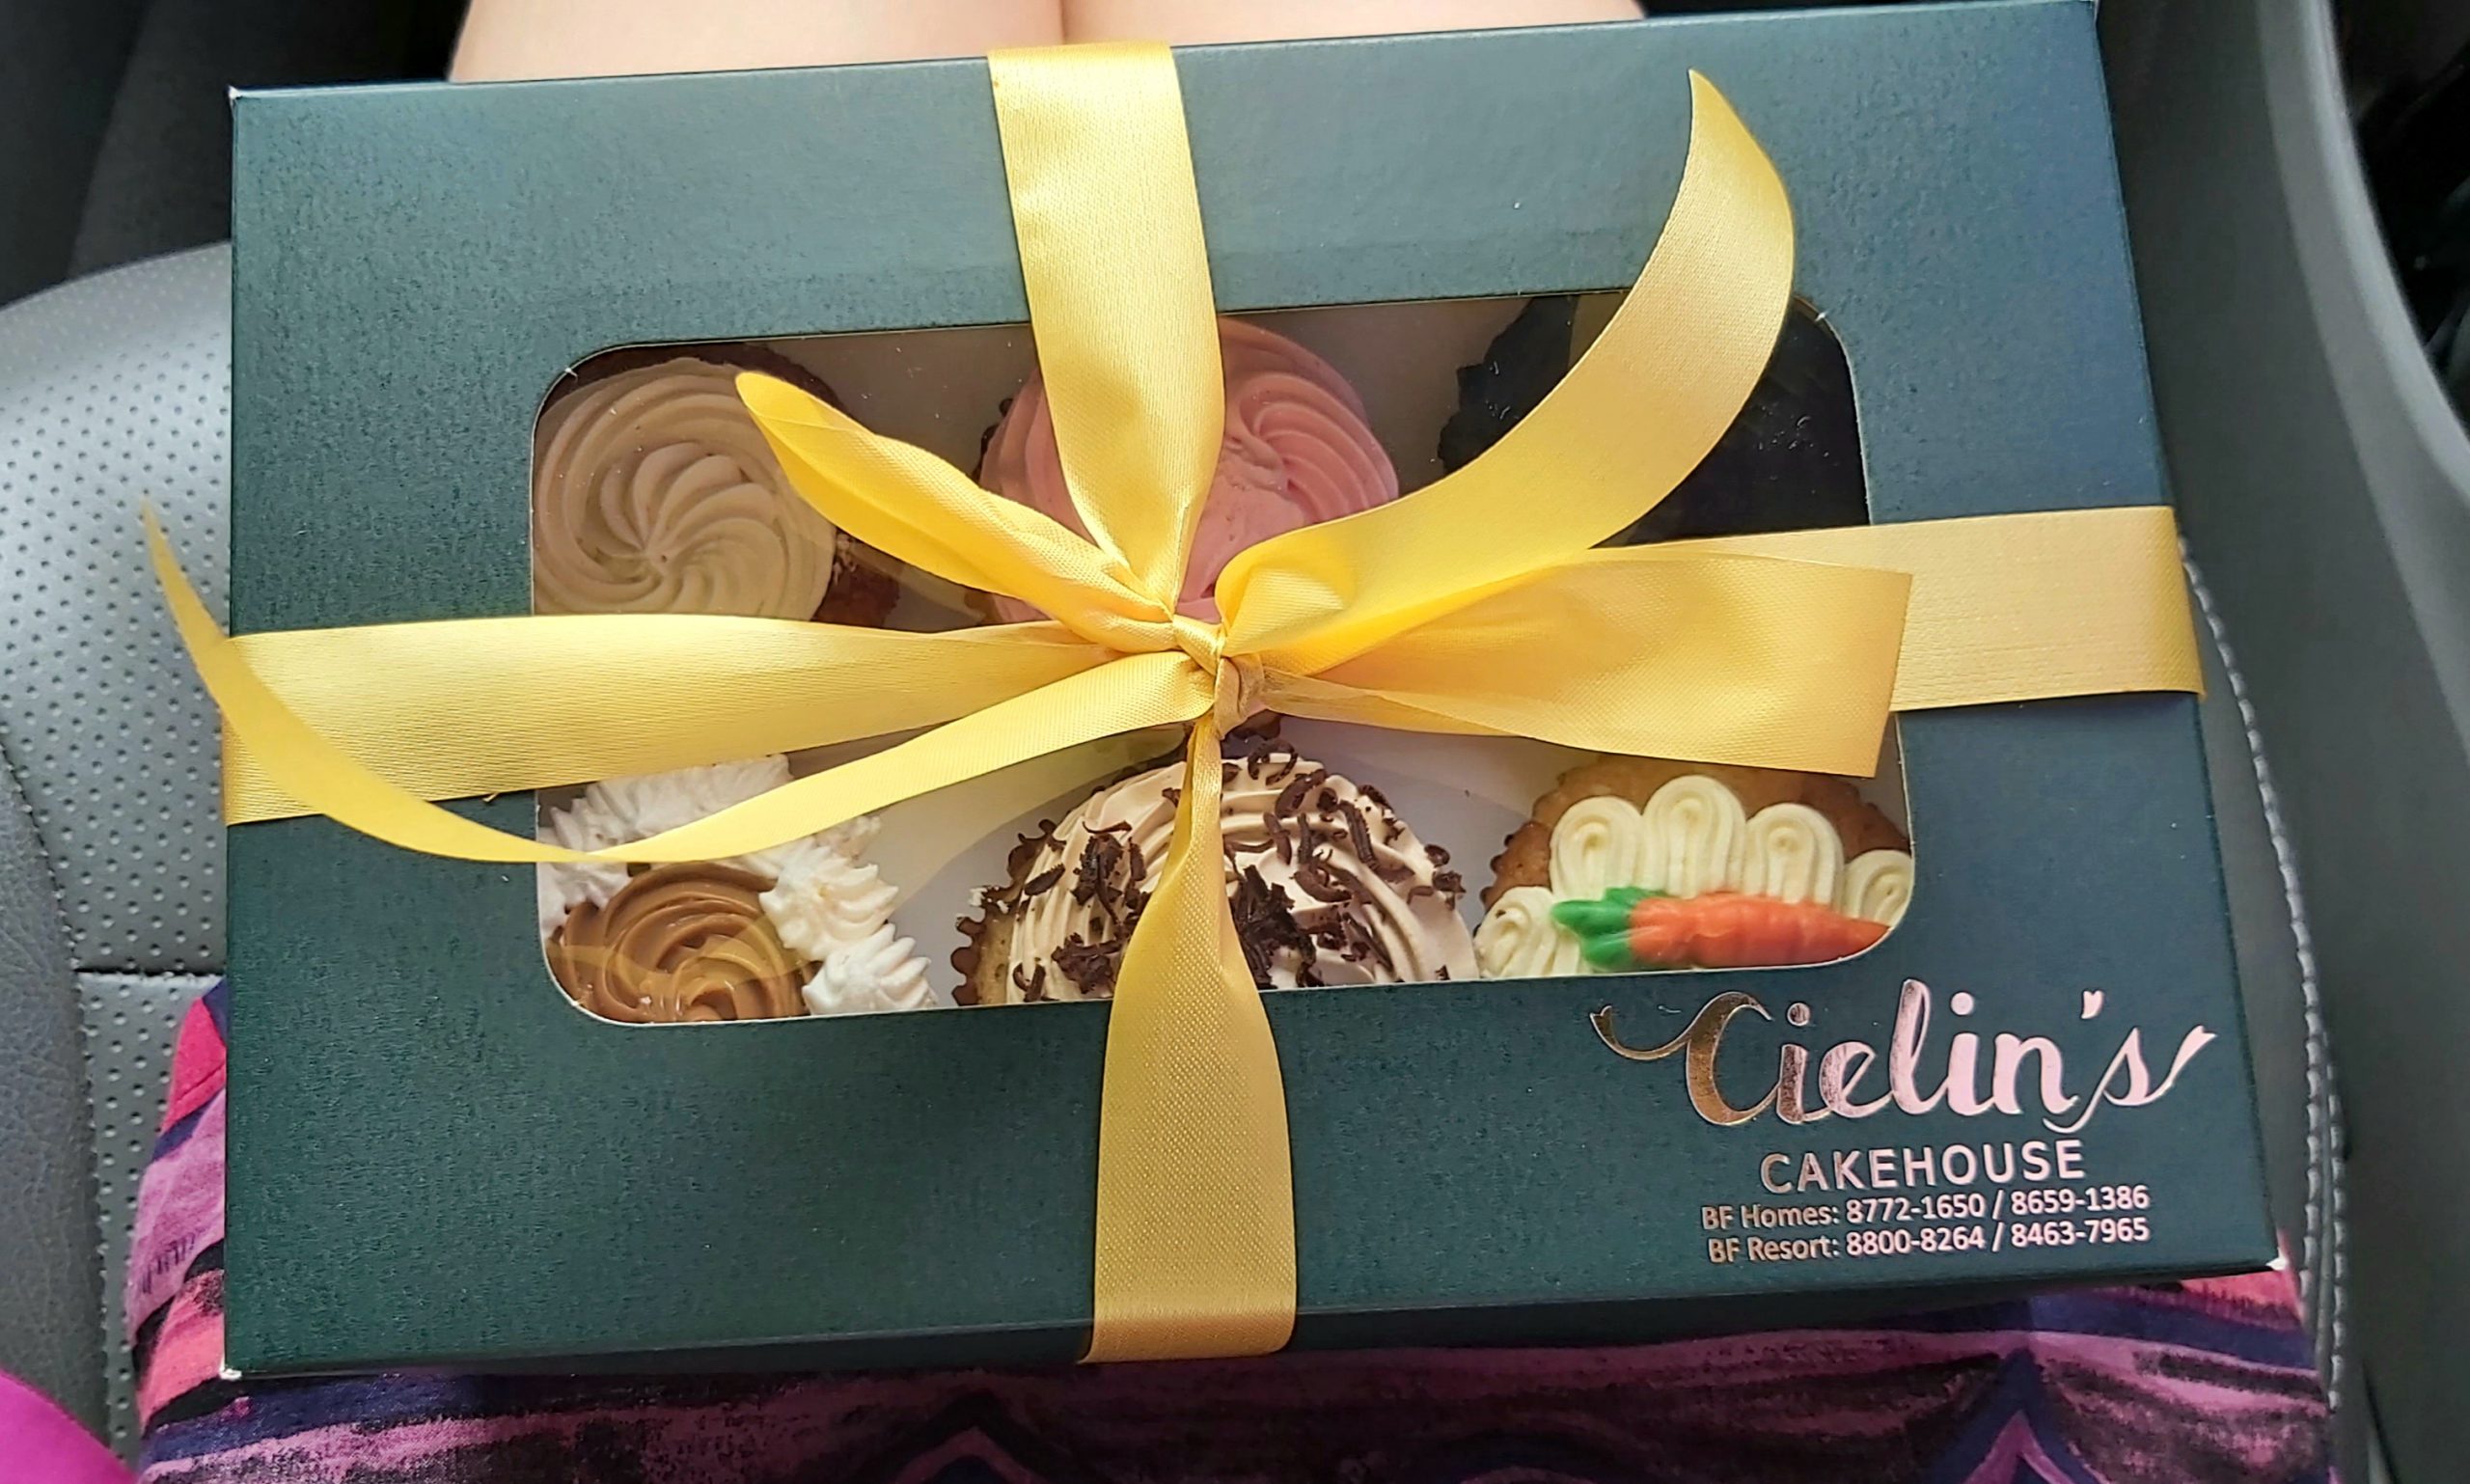 Cupcakes from Cielin's Cakehouse, Alabang